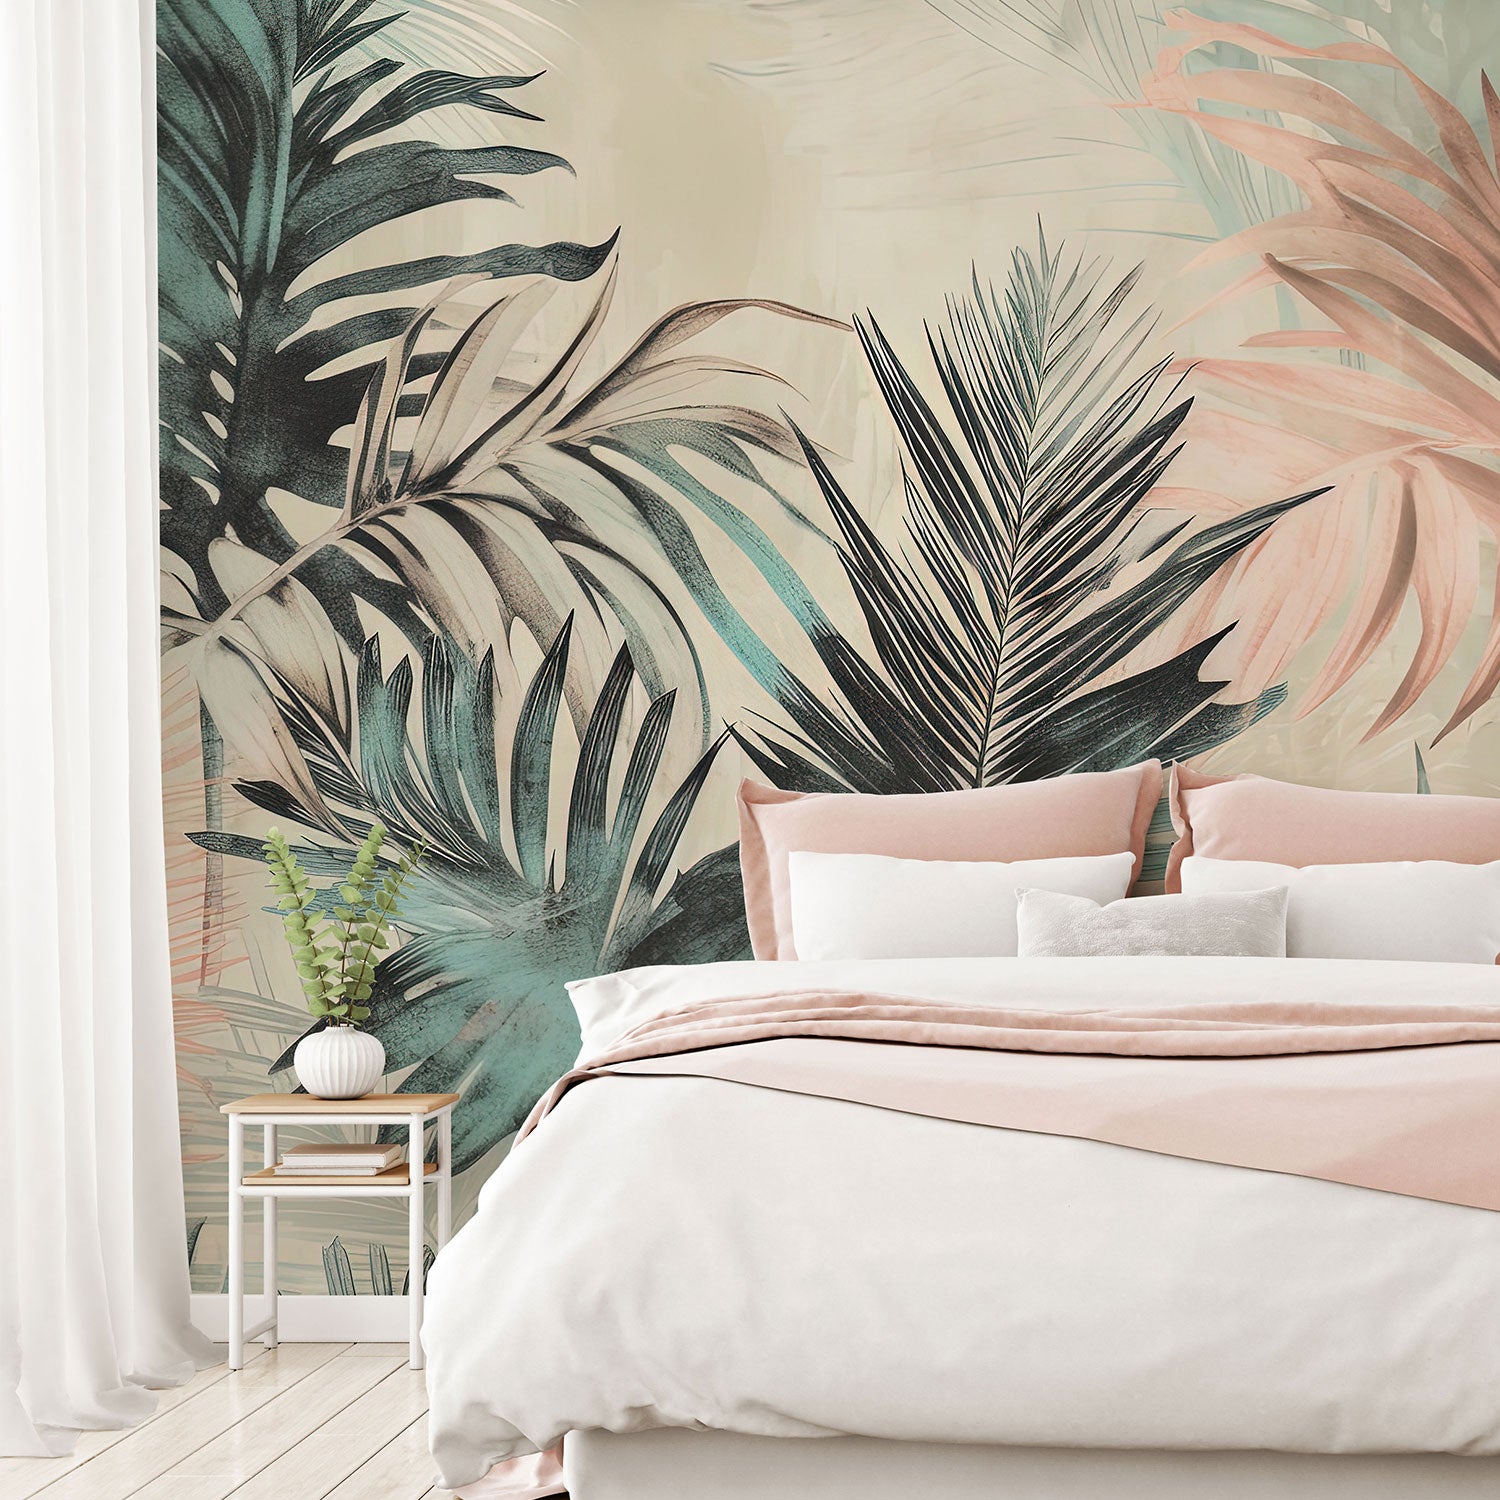 Tropical wallwrap in bedroom with different shades of green and pink